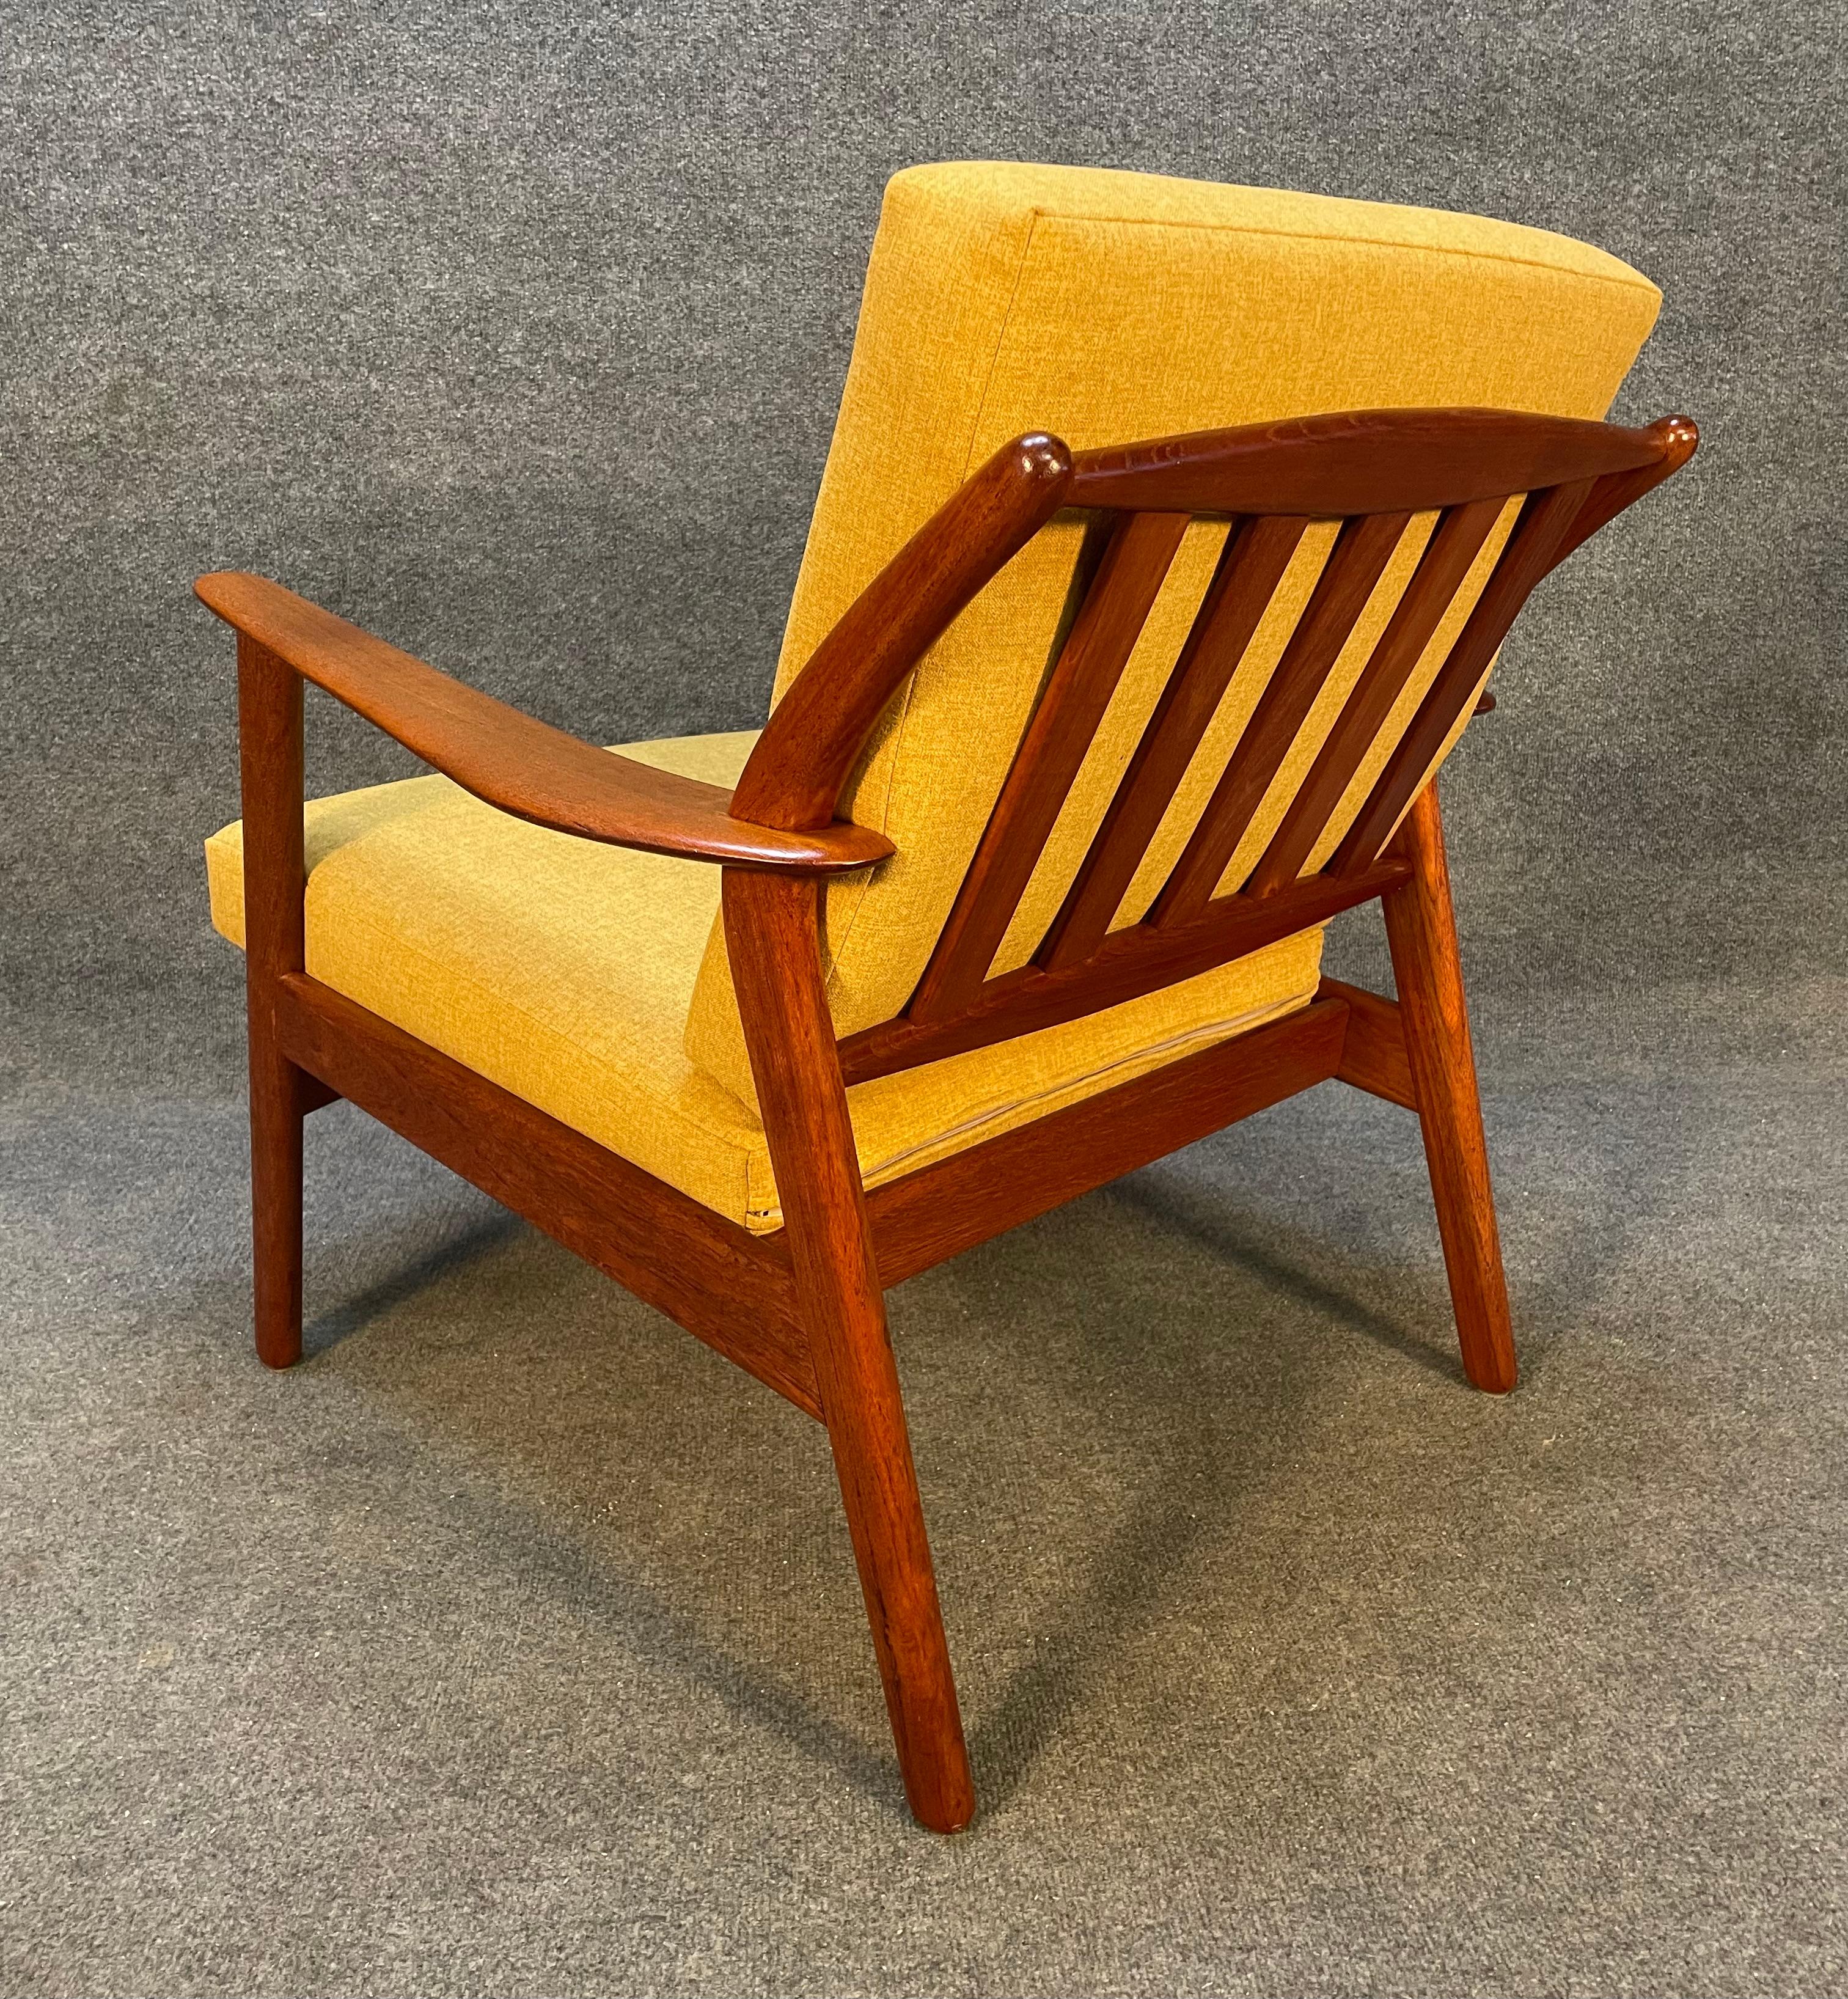 Here is a beautiful Scandinavian Modern easy chair in teak designed by Niels Kofoed and manufactured by Kofoed Møbelfabrik in Denmark in the 1960's.
This exquisite chair, recently imported from Europe to California before its refinishing, features